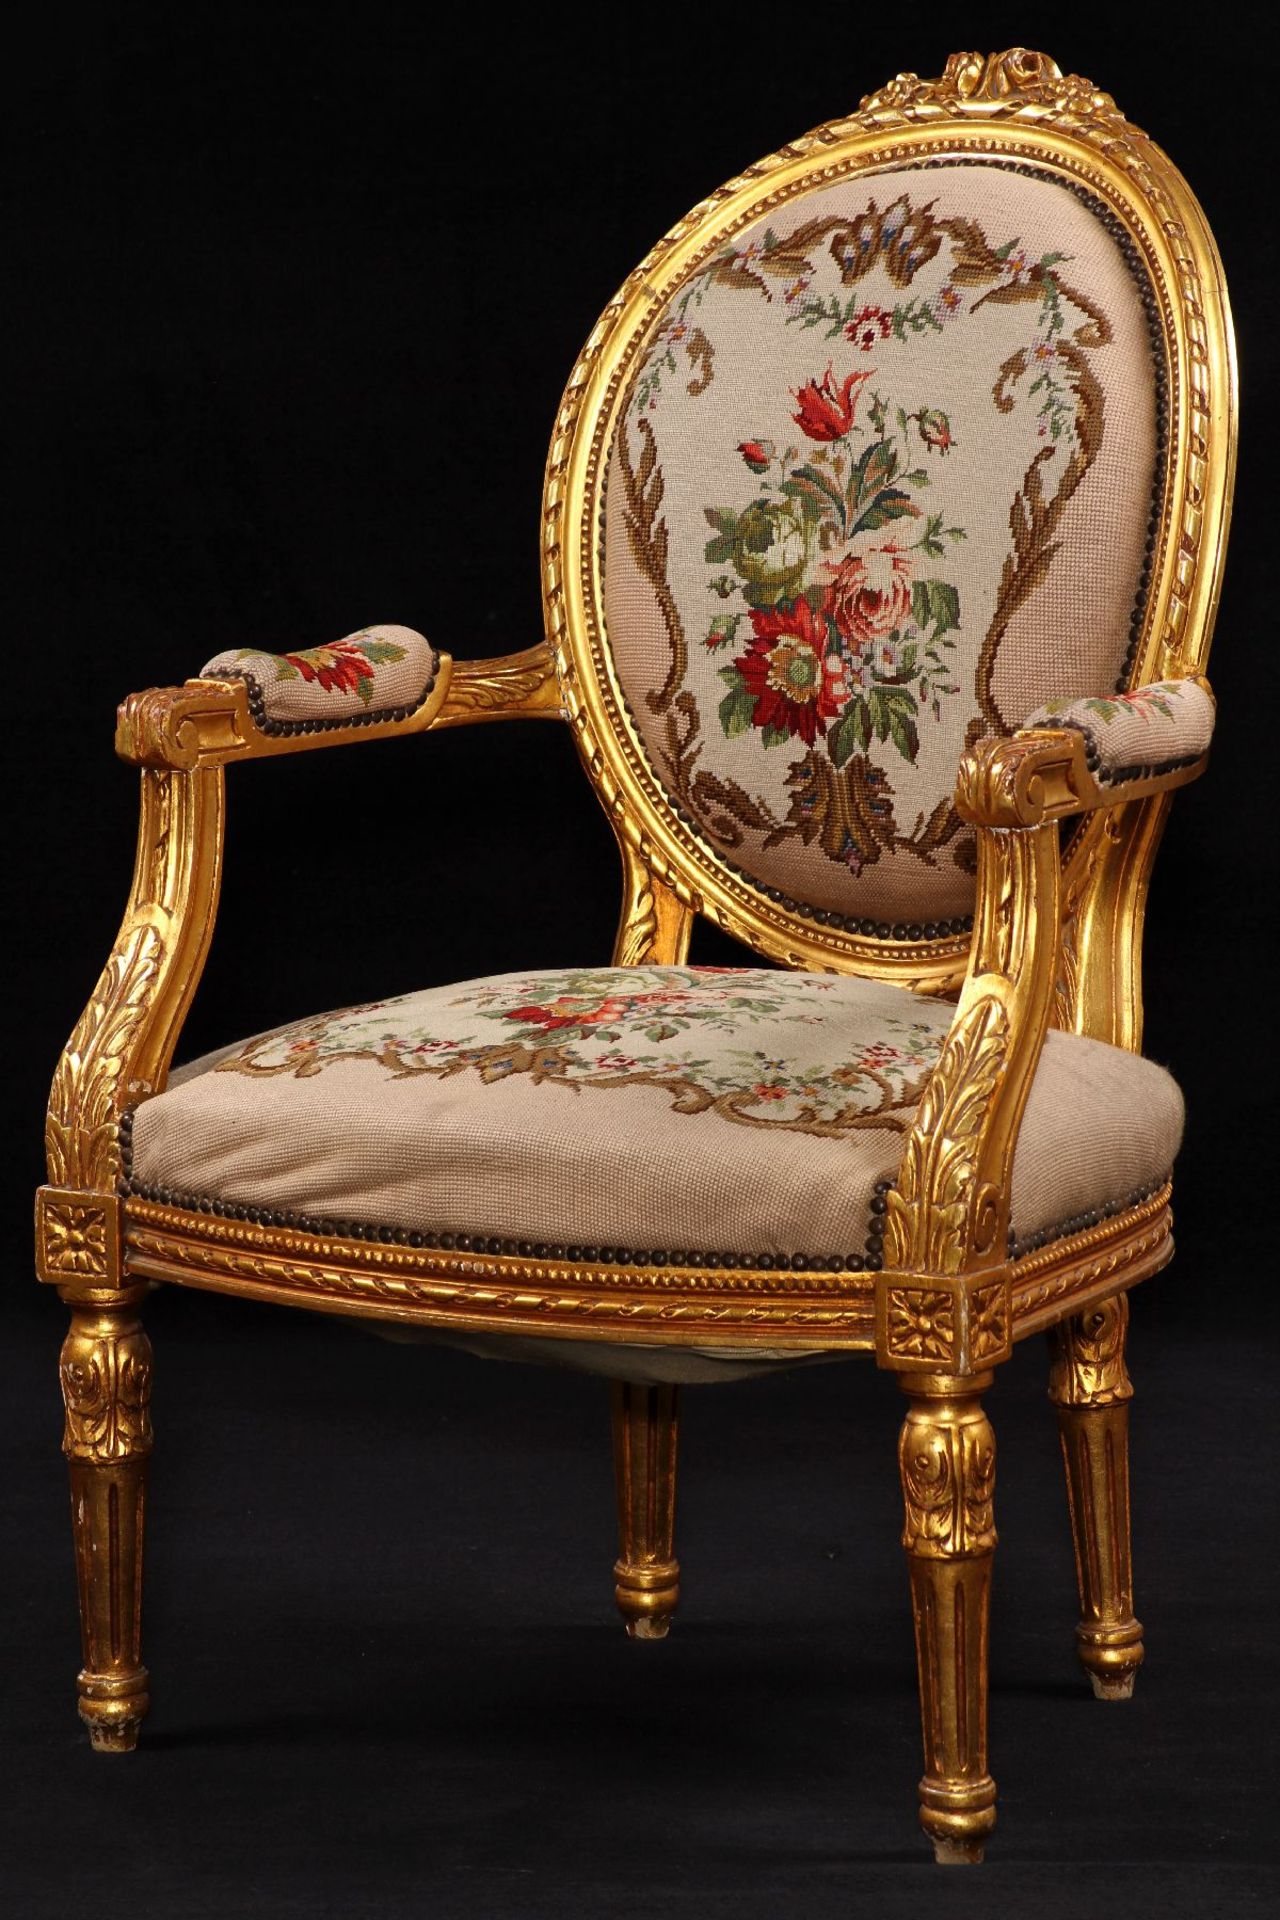 Armchair, frame in solid wood, painted gold, rich ornamental carvings in the form of roses,